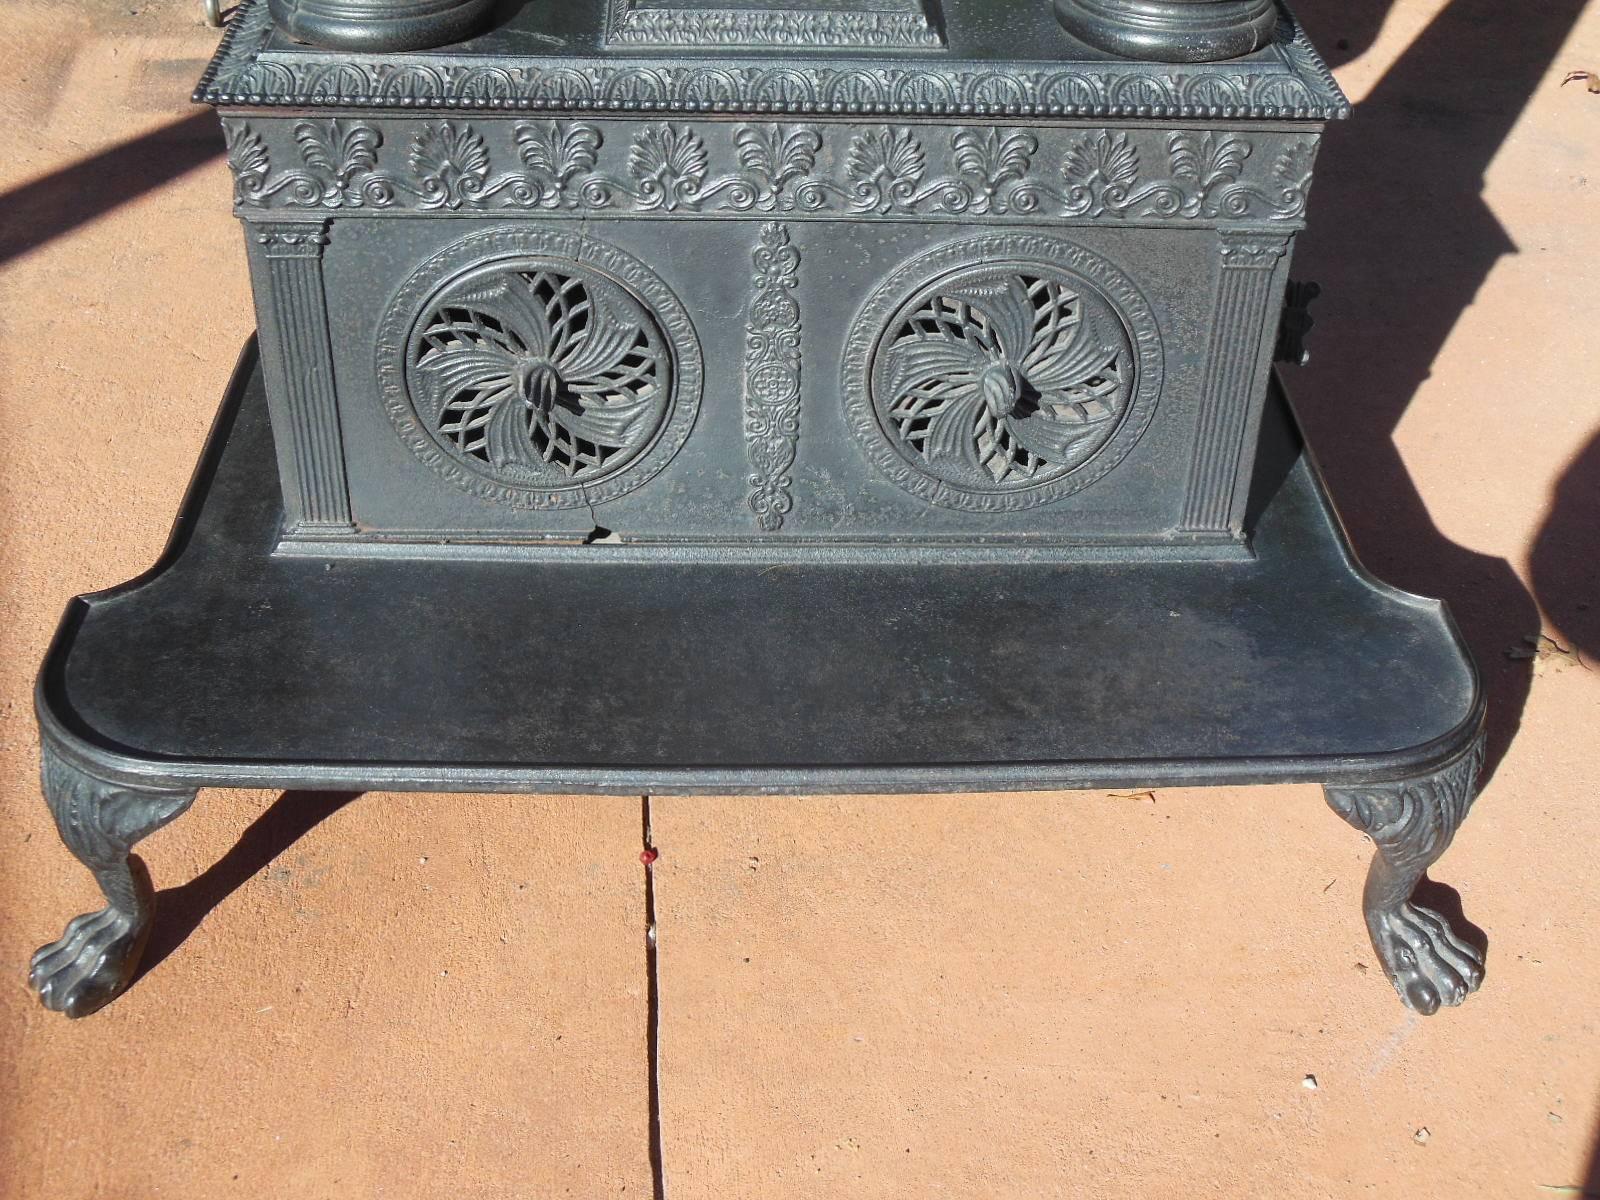 This most elaborate four column cast iron stove is attributed to "James Wager Troy NY 1840-43". The Albany Institute of Art has a large collection of these 
Ornate parlor stoves that were made in the Albany area. Tammis Groft former